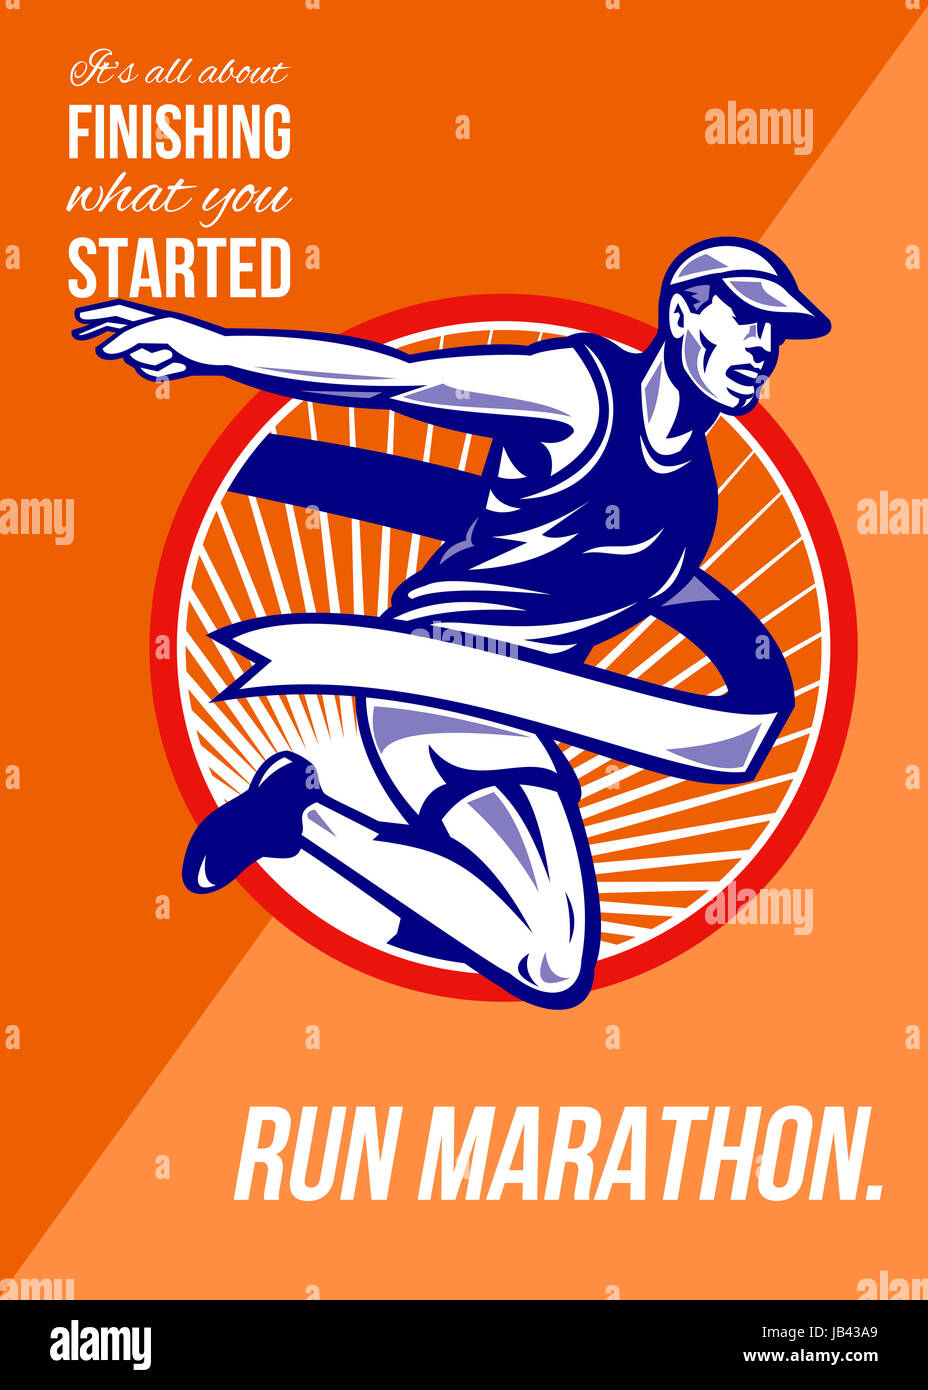 Poster greeting card illustration showing a male athlete marathon runner running with finish line ribbon tape set inside circle done in retro style with words Marathon, it's all about finishing what you started. Stock Photo